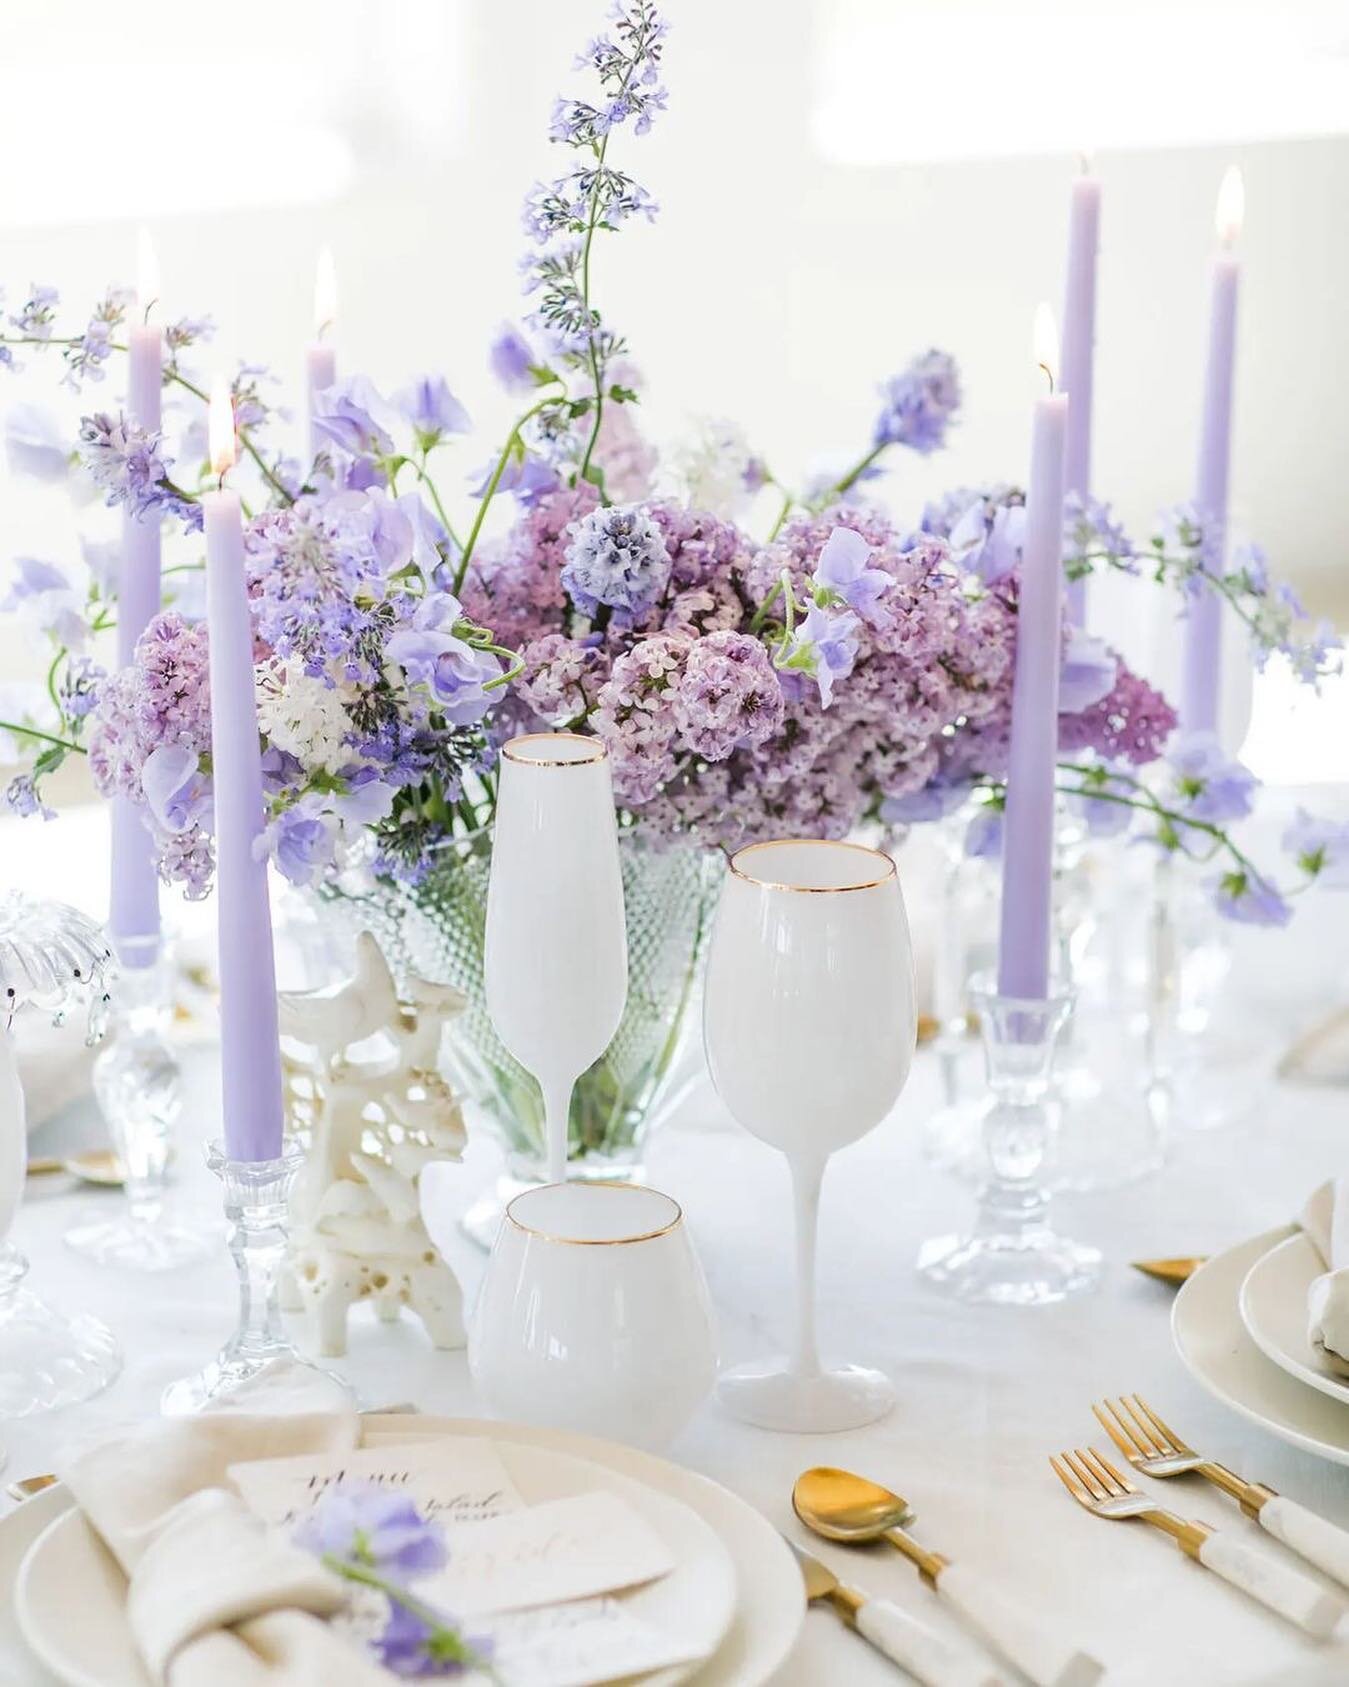 Beautiful weekends like the one we are about to have make me want to dress up every meal with a table scape like this! Don&rsquo;t you think?? 

Posted by: @todaysbridemag 

What a gorgeous tablescape, topped off with beautiful lilacs. Anyone plannin